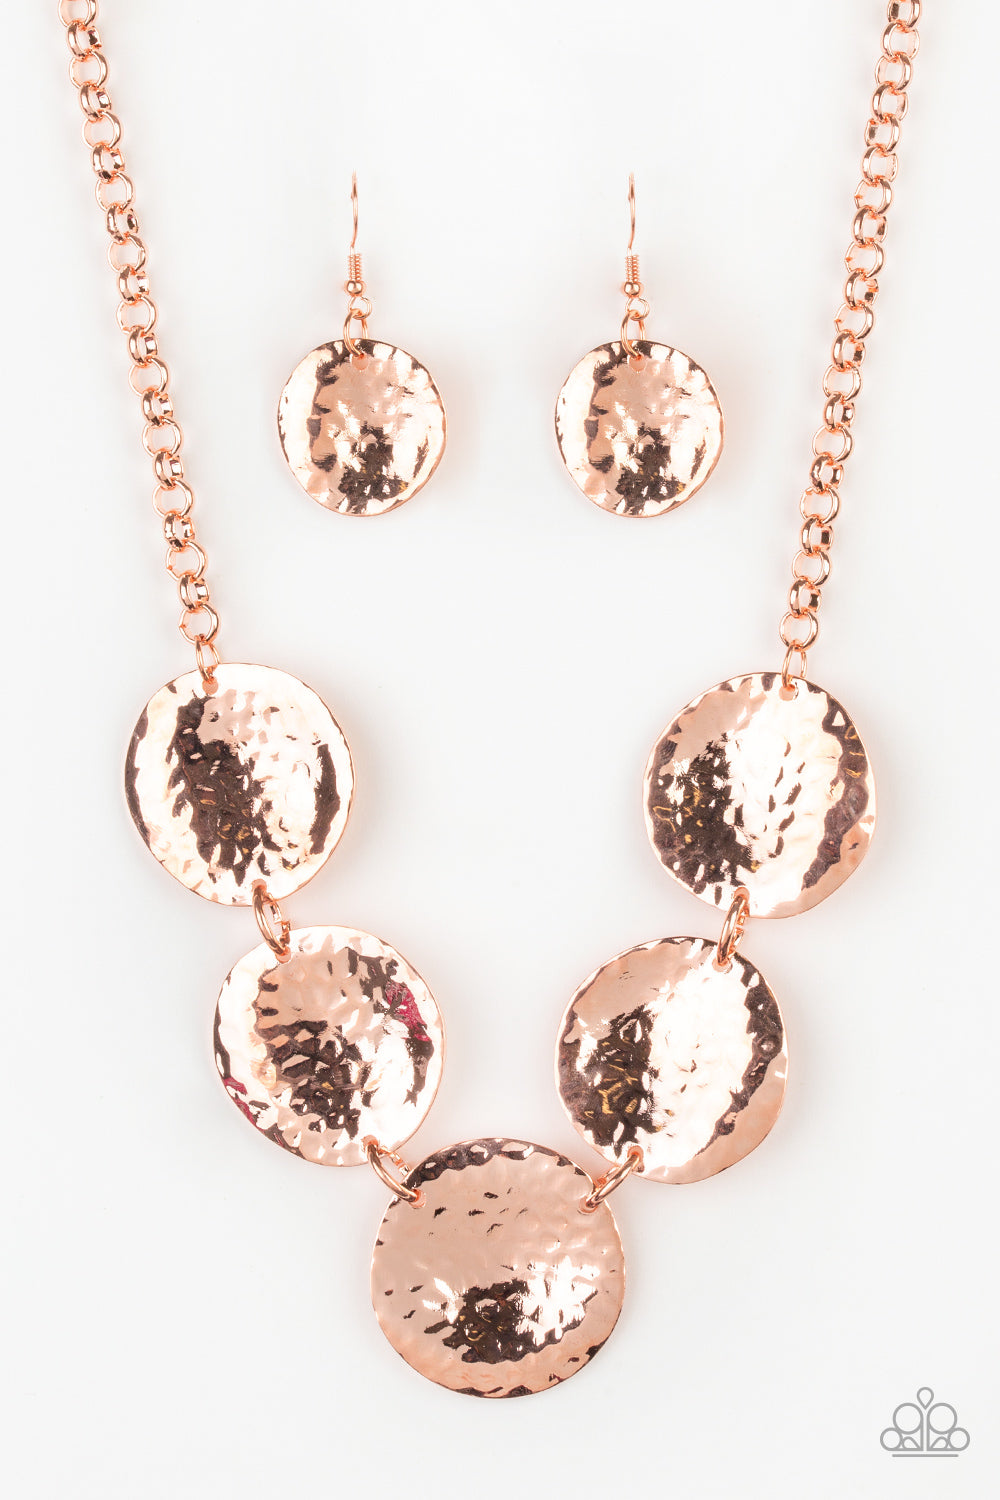 &lt;P&gt;Featuring a hammered high-sheen finish, imperfect round shiny copper frames link below the collar for a casual look. Features an adjustable clasp closure.&lt;/p&gt;

&lt;P&gt;&lt;i&gt; Sold as one individual necklace.  Includes one pair of matching earrings.
&lt;/i&gt;&lt;/p&gt;

&lt;img src=\&quot;https://d9b54x484lq62.cloudfront.net/paparazzi/shopping/images/517_tag150x115_1.png\&quot; alt=\&quot;New Kit\&quot; align=\&quot;middle\&quot; height=\&quot;50\&quot; width=\&quot;50\&quot;/&gt;